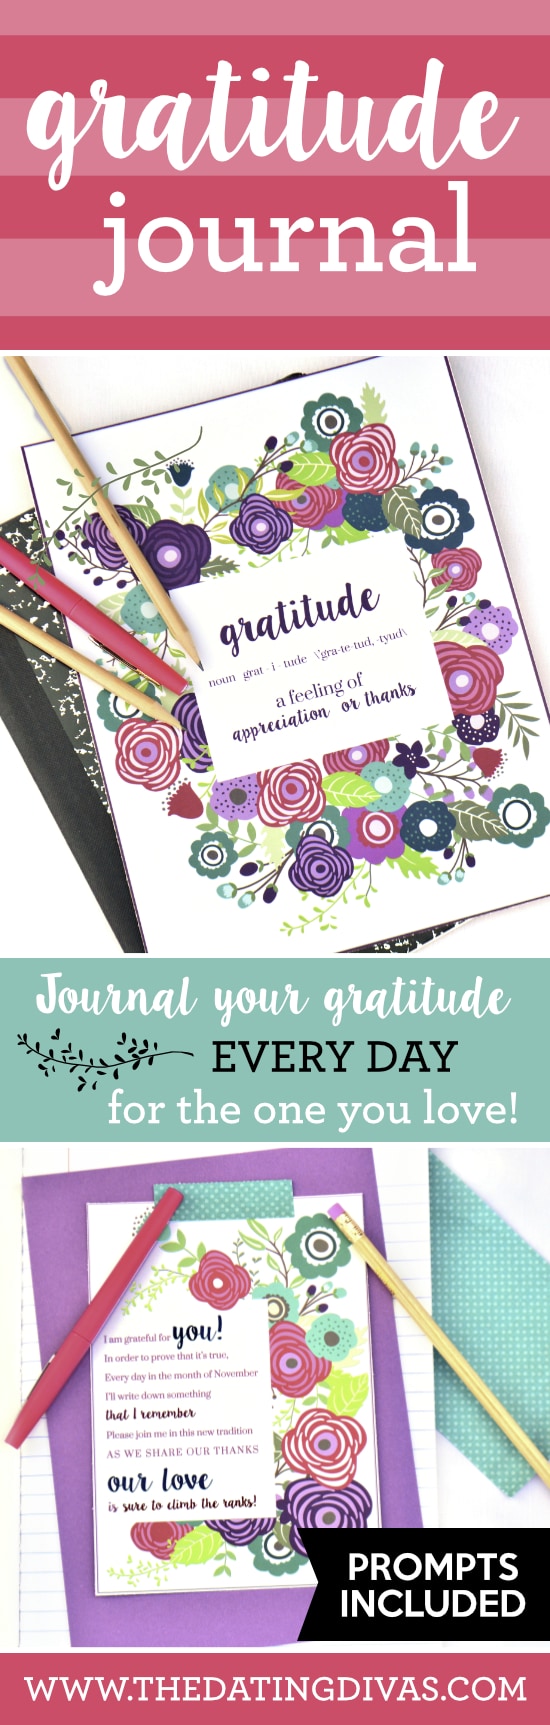 Fabulous gratitude journal to share the love for your spouse through the month!